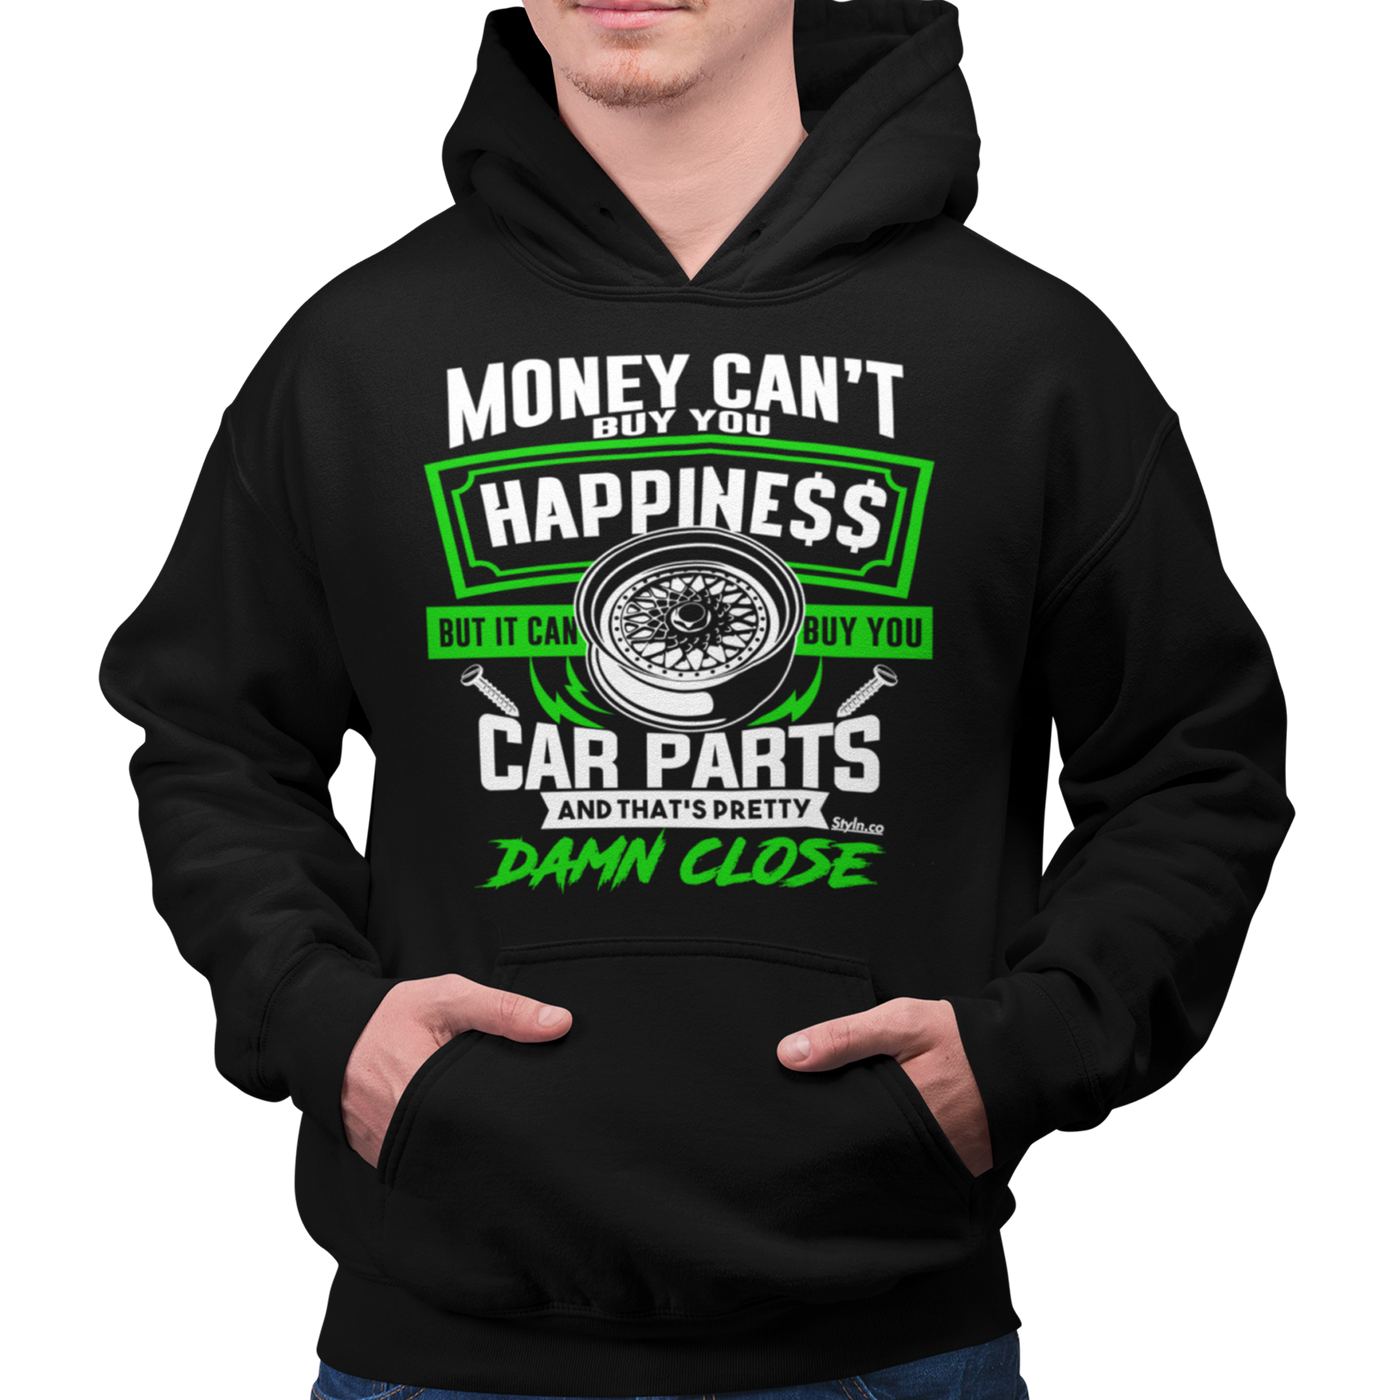 MONEY BUYS CAR PARTS HAPPINESS Hoodie